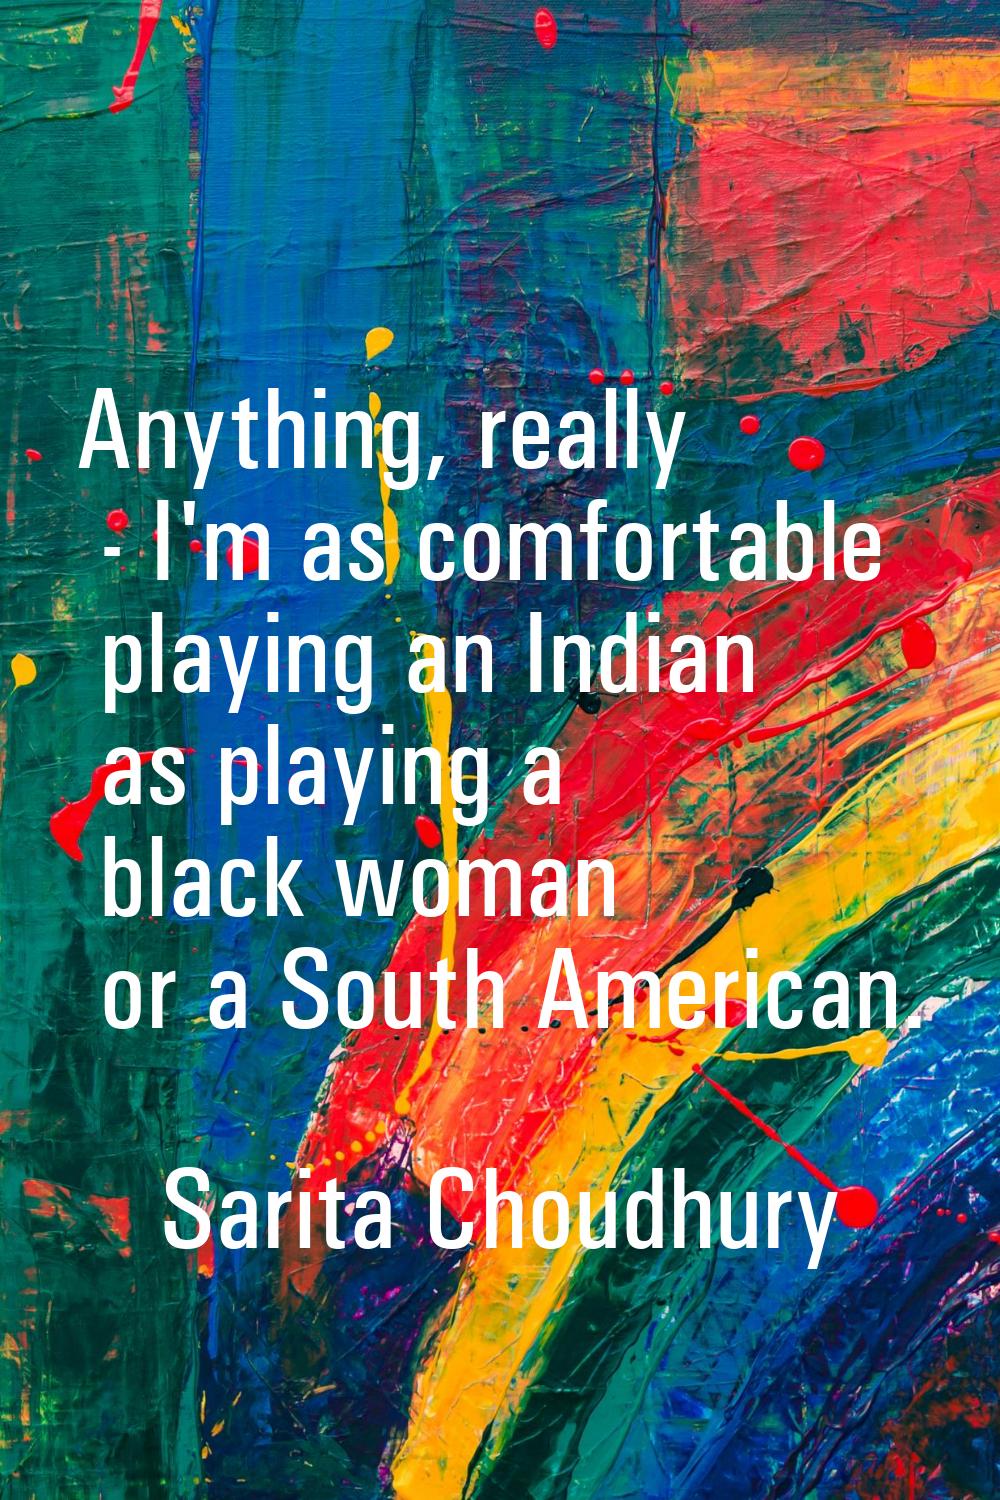 Anything, really - I'm as comfortable playing an Indian as playing a black woman or a South America